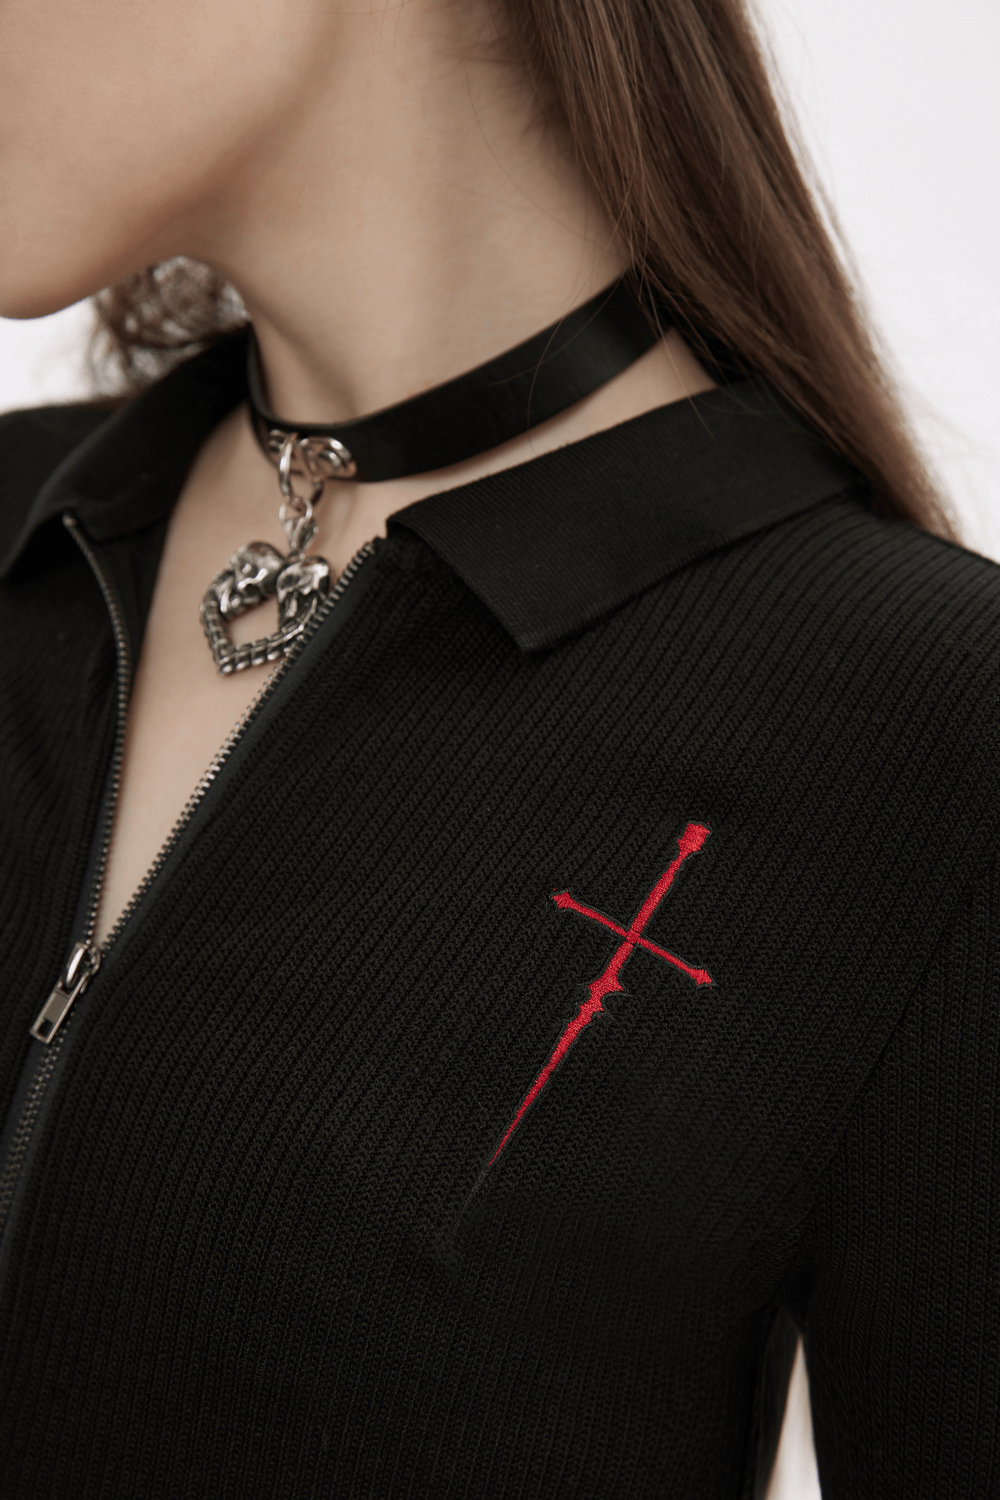 Women's Knitted Zippered Top with Embroidered Red Cross